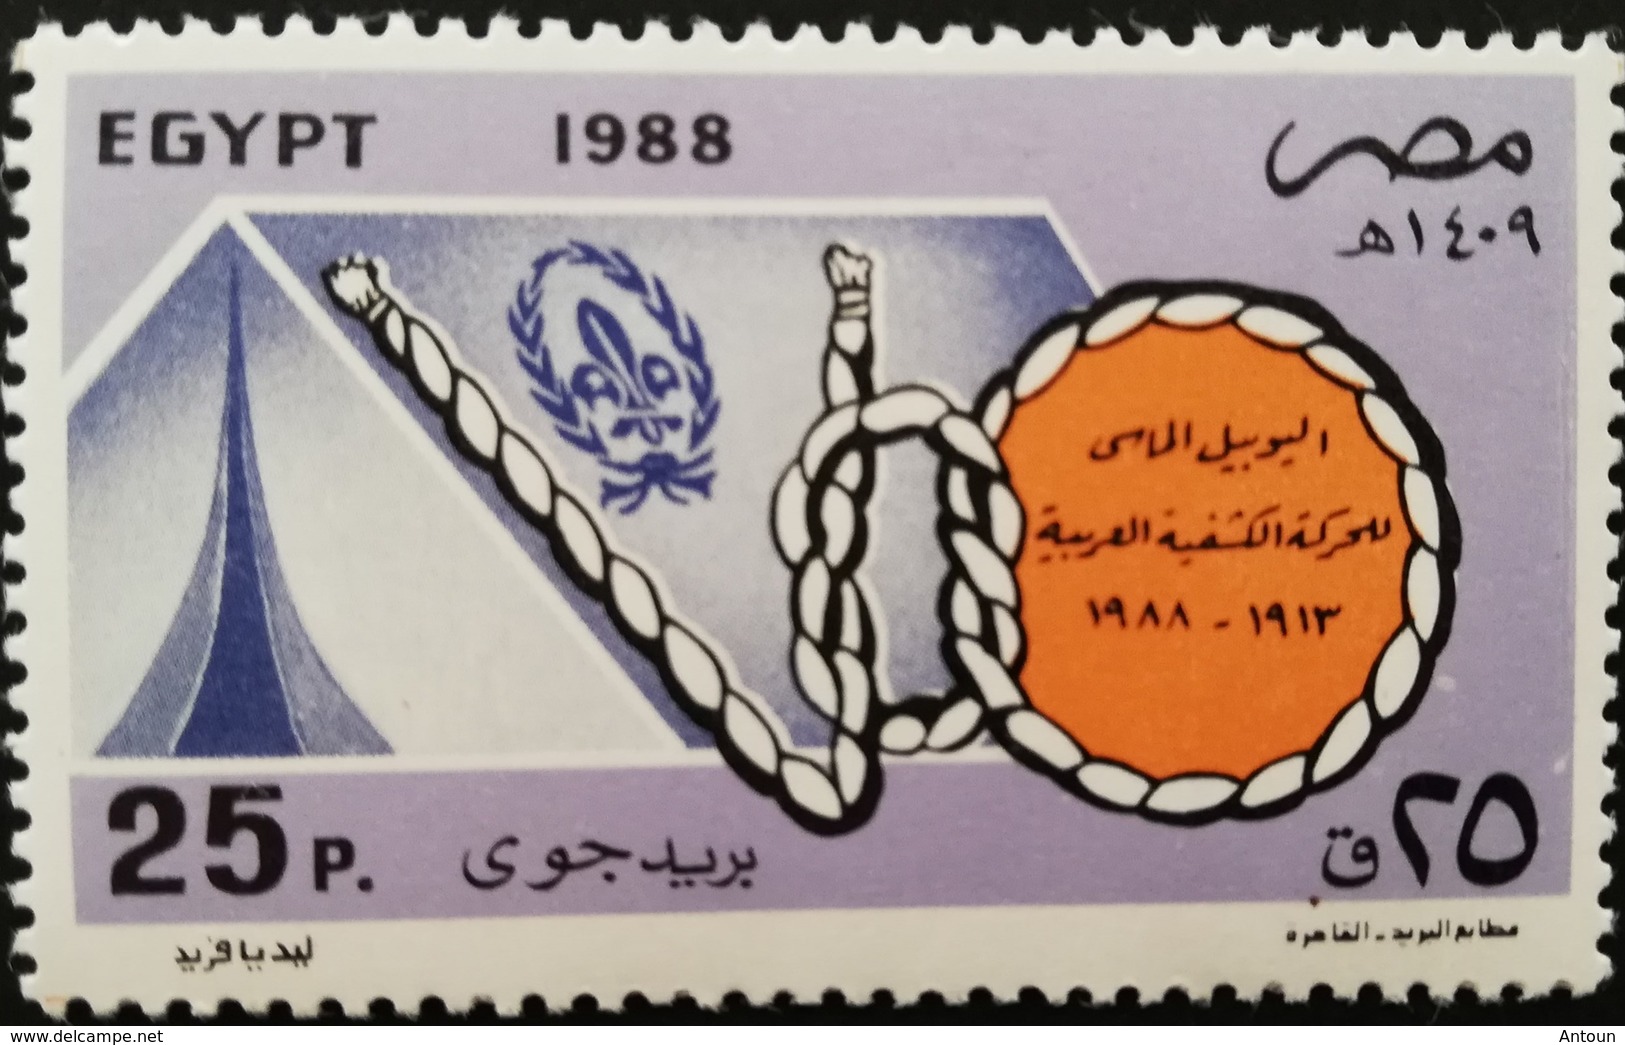 Egypt 1988 Arab Scouting Organization  POSTAGE TO BE ADDED ON ALL ITEMS - Ongebruikt